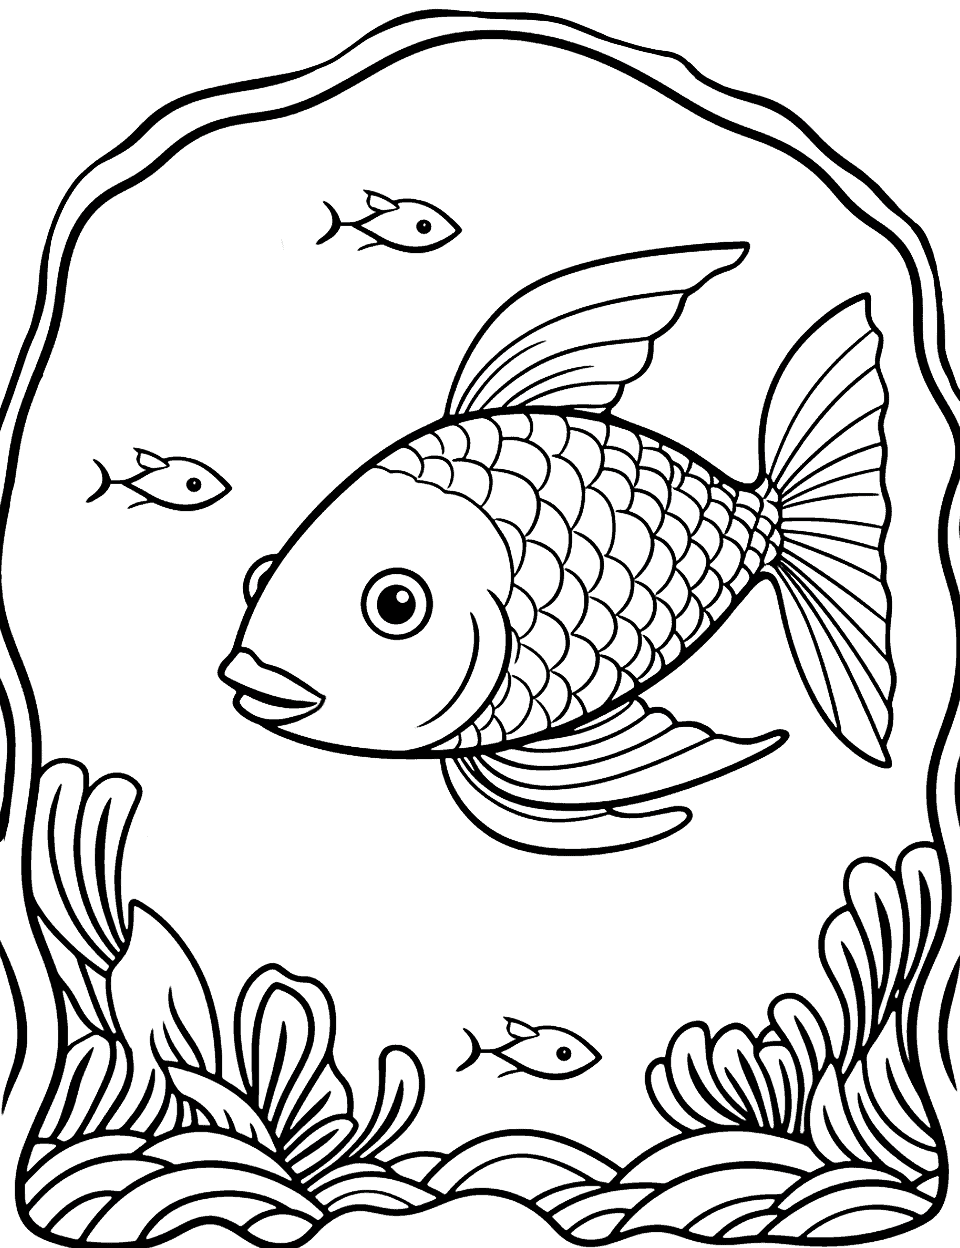 Fish in an Underwater Cave Coloring Page - Fish exploring the mysteries of an underwater cave.